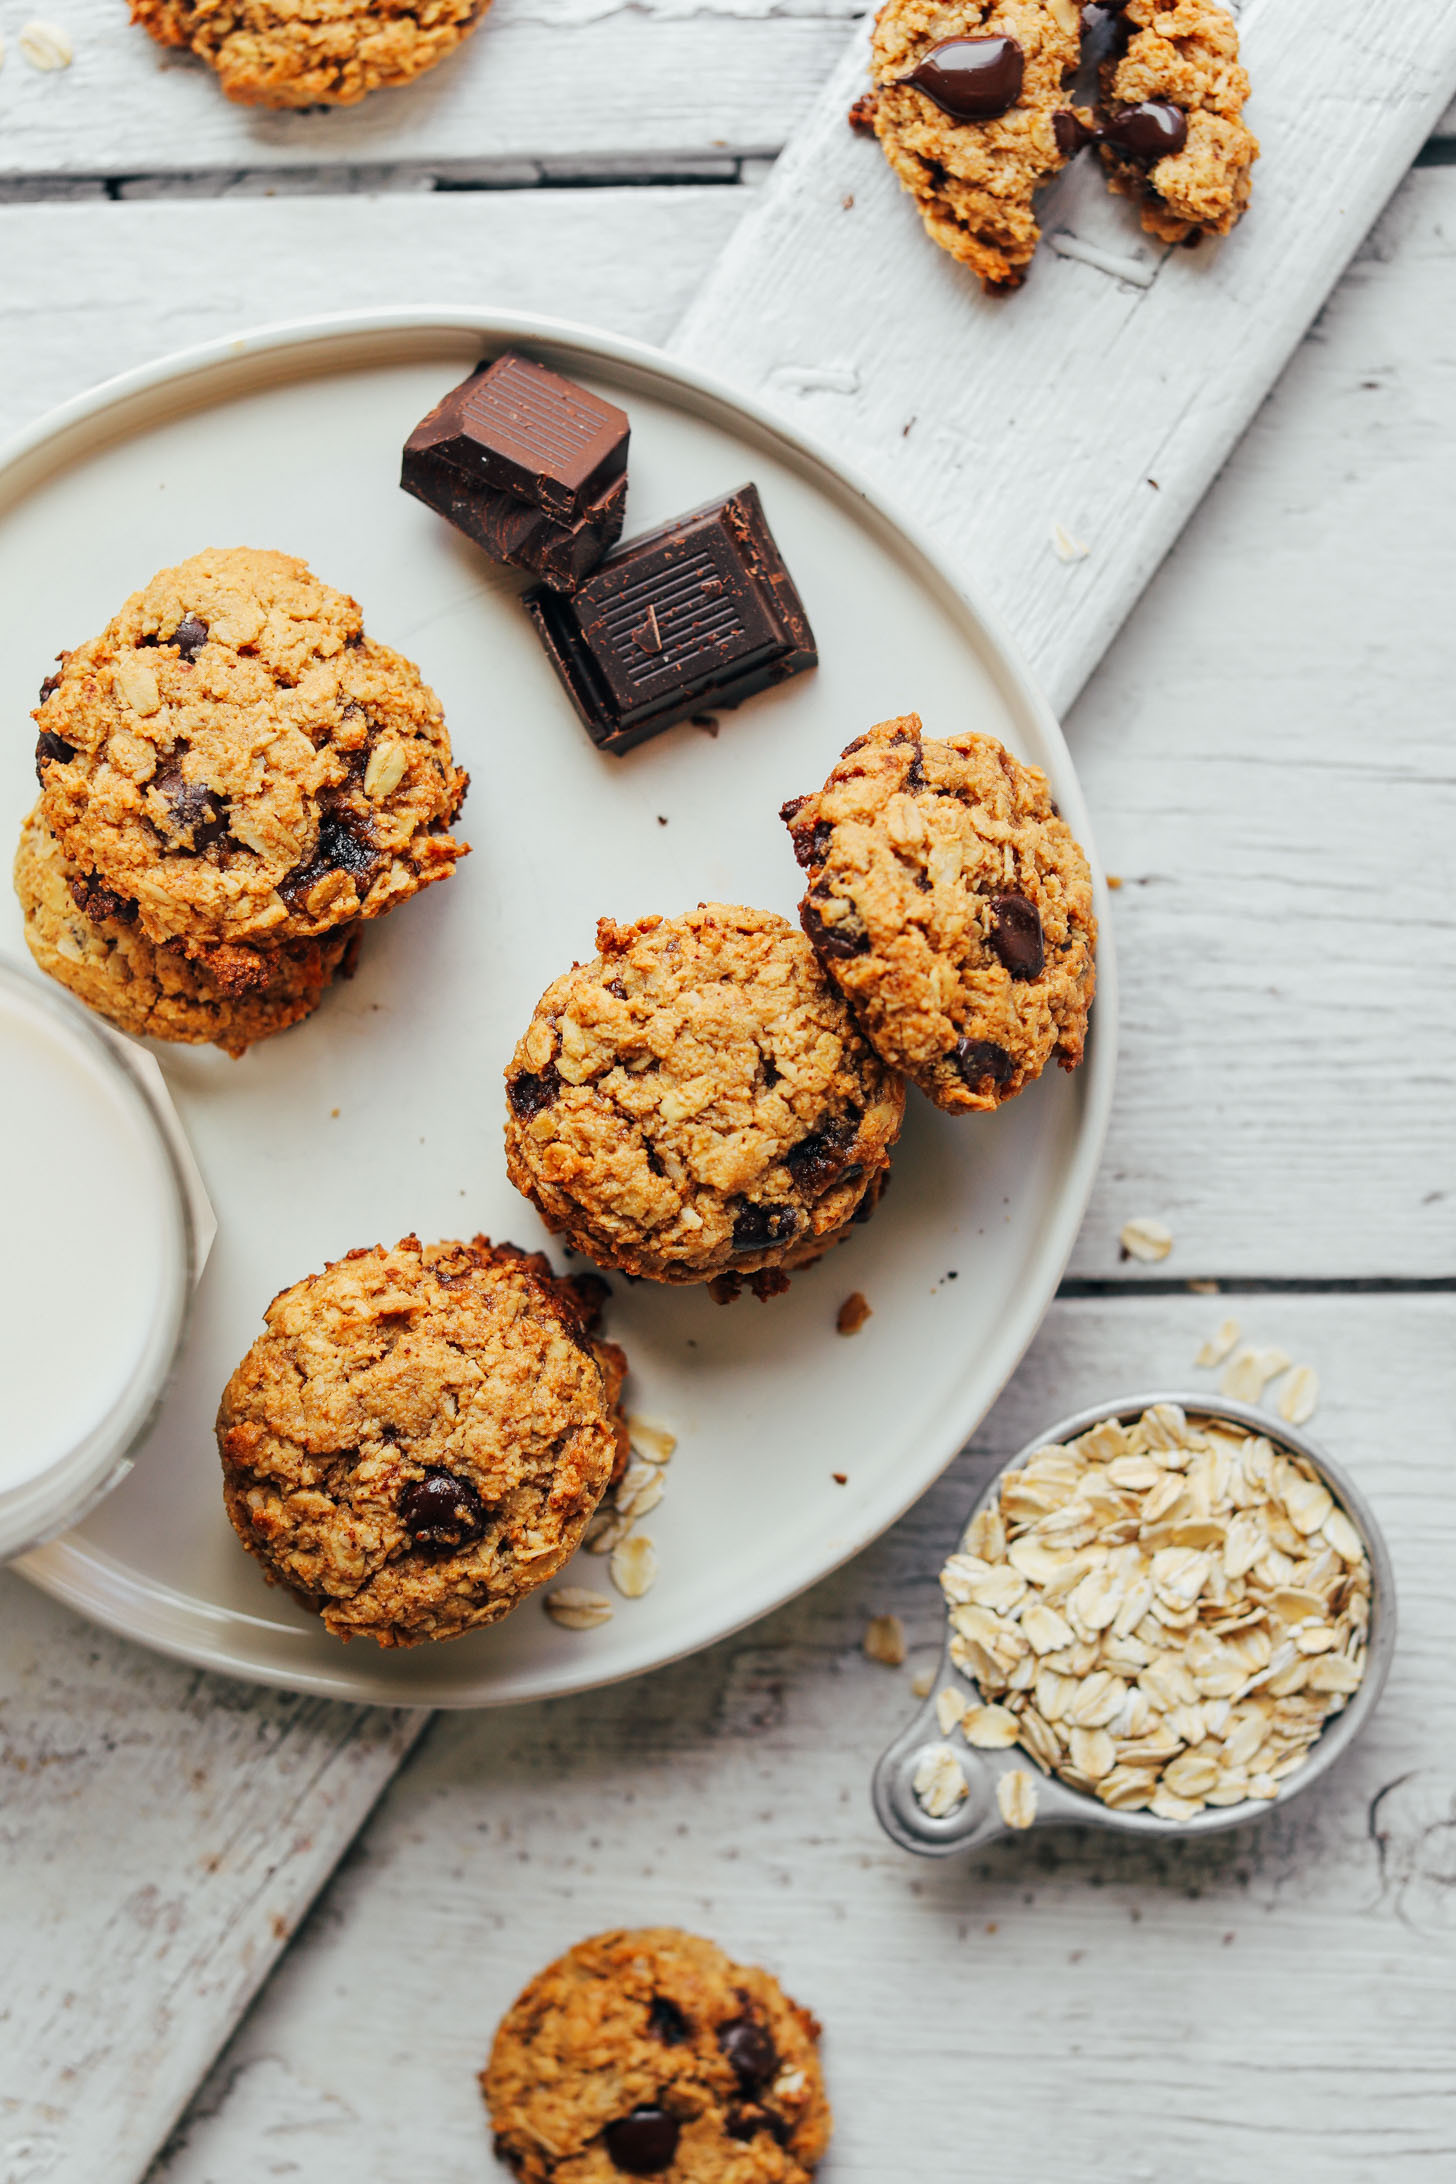 Healthy Oatmeal Choc Chip Cookies
 healthy oatmeal chocolate chip cookies gluten free